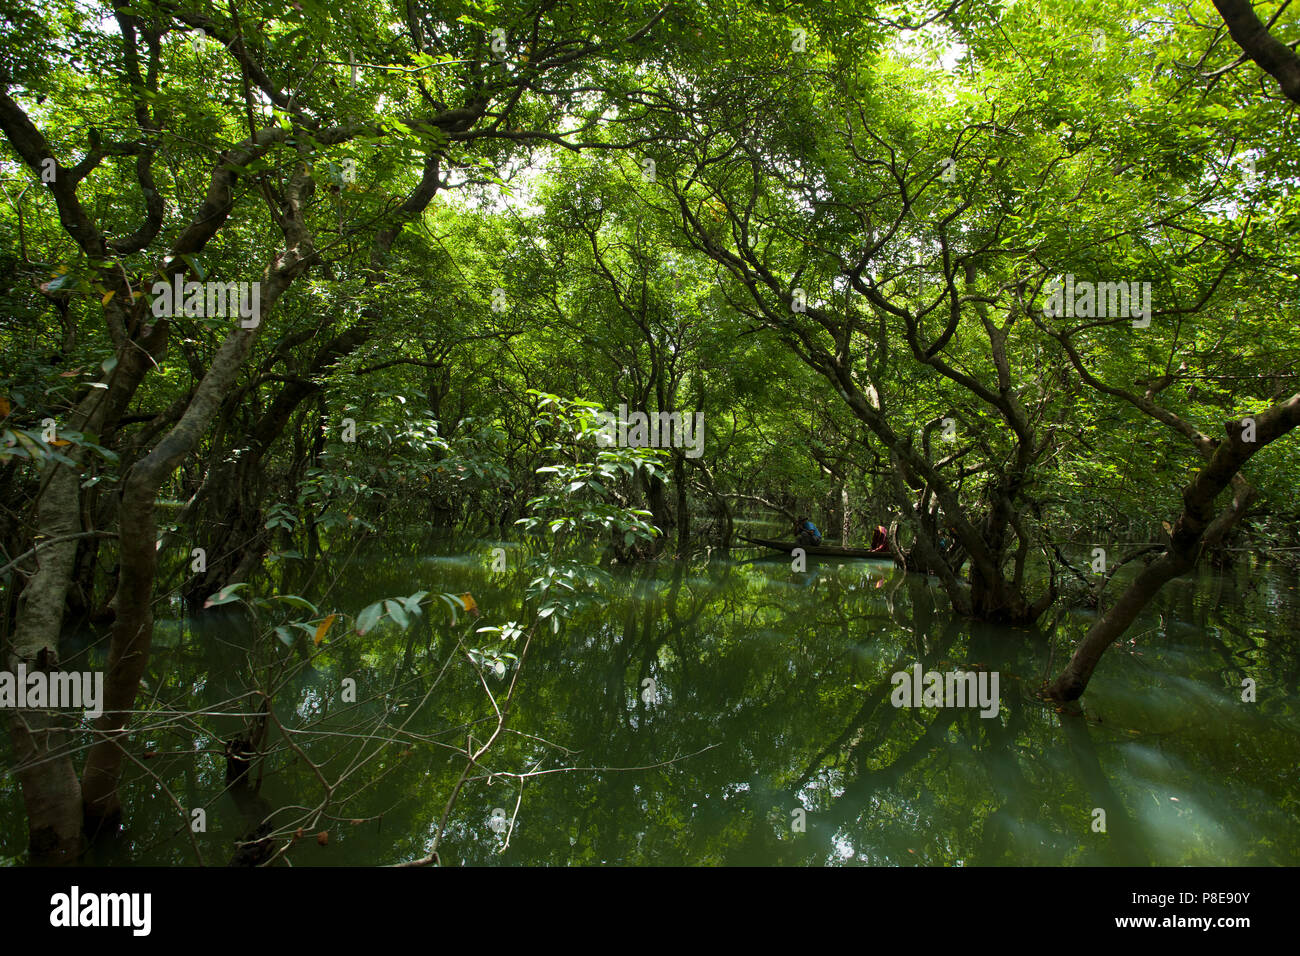 Ratargul is a fresh water swamp forest situated in Sylhet by the river of Goain. This evergreen forest is getting submerged under 20 to 30 feet water  Stock Photo